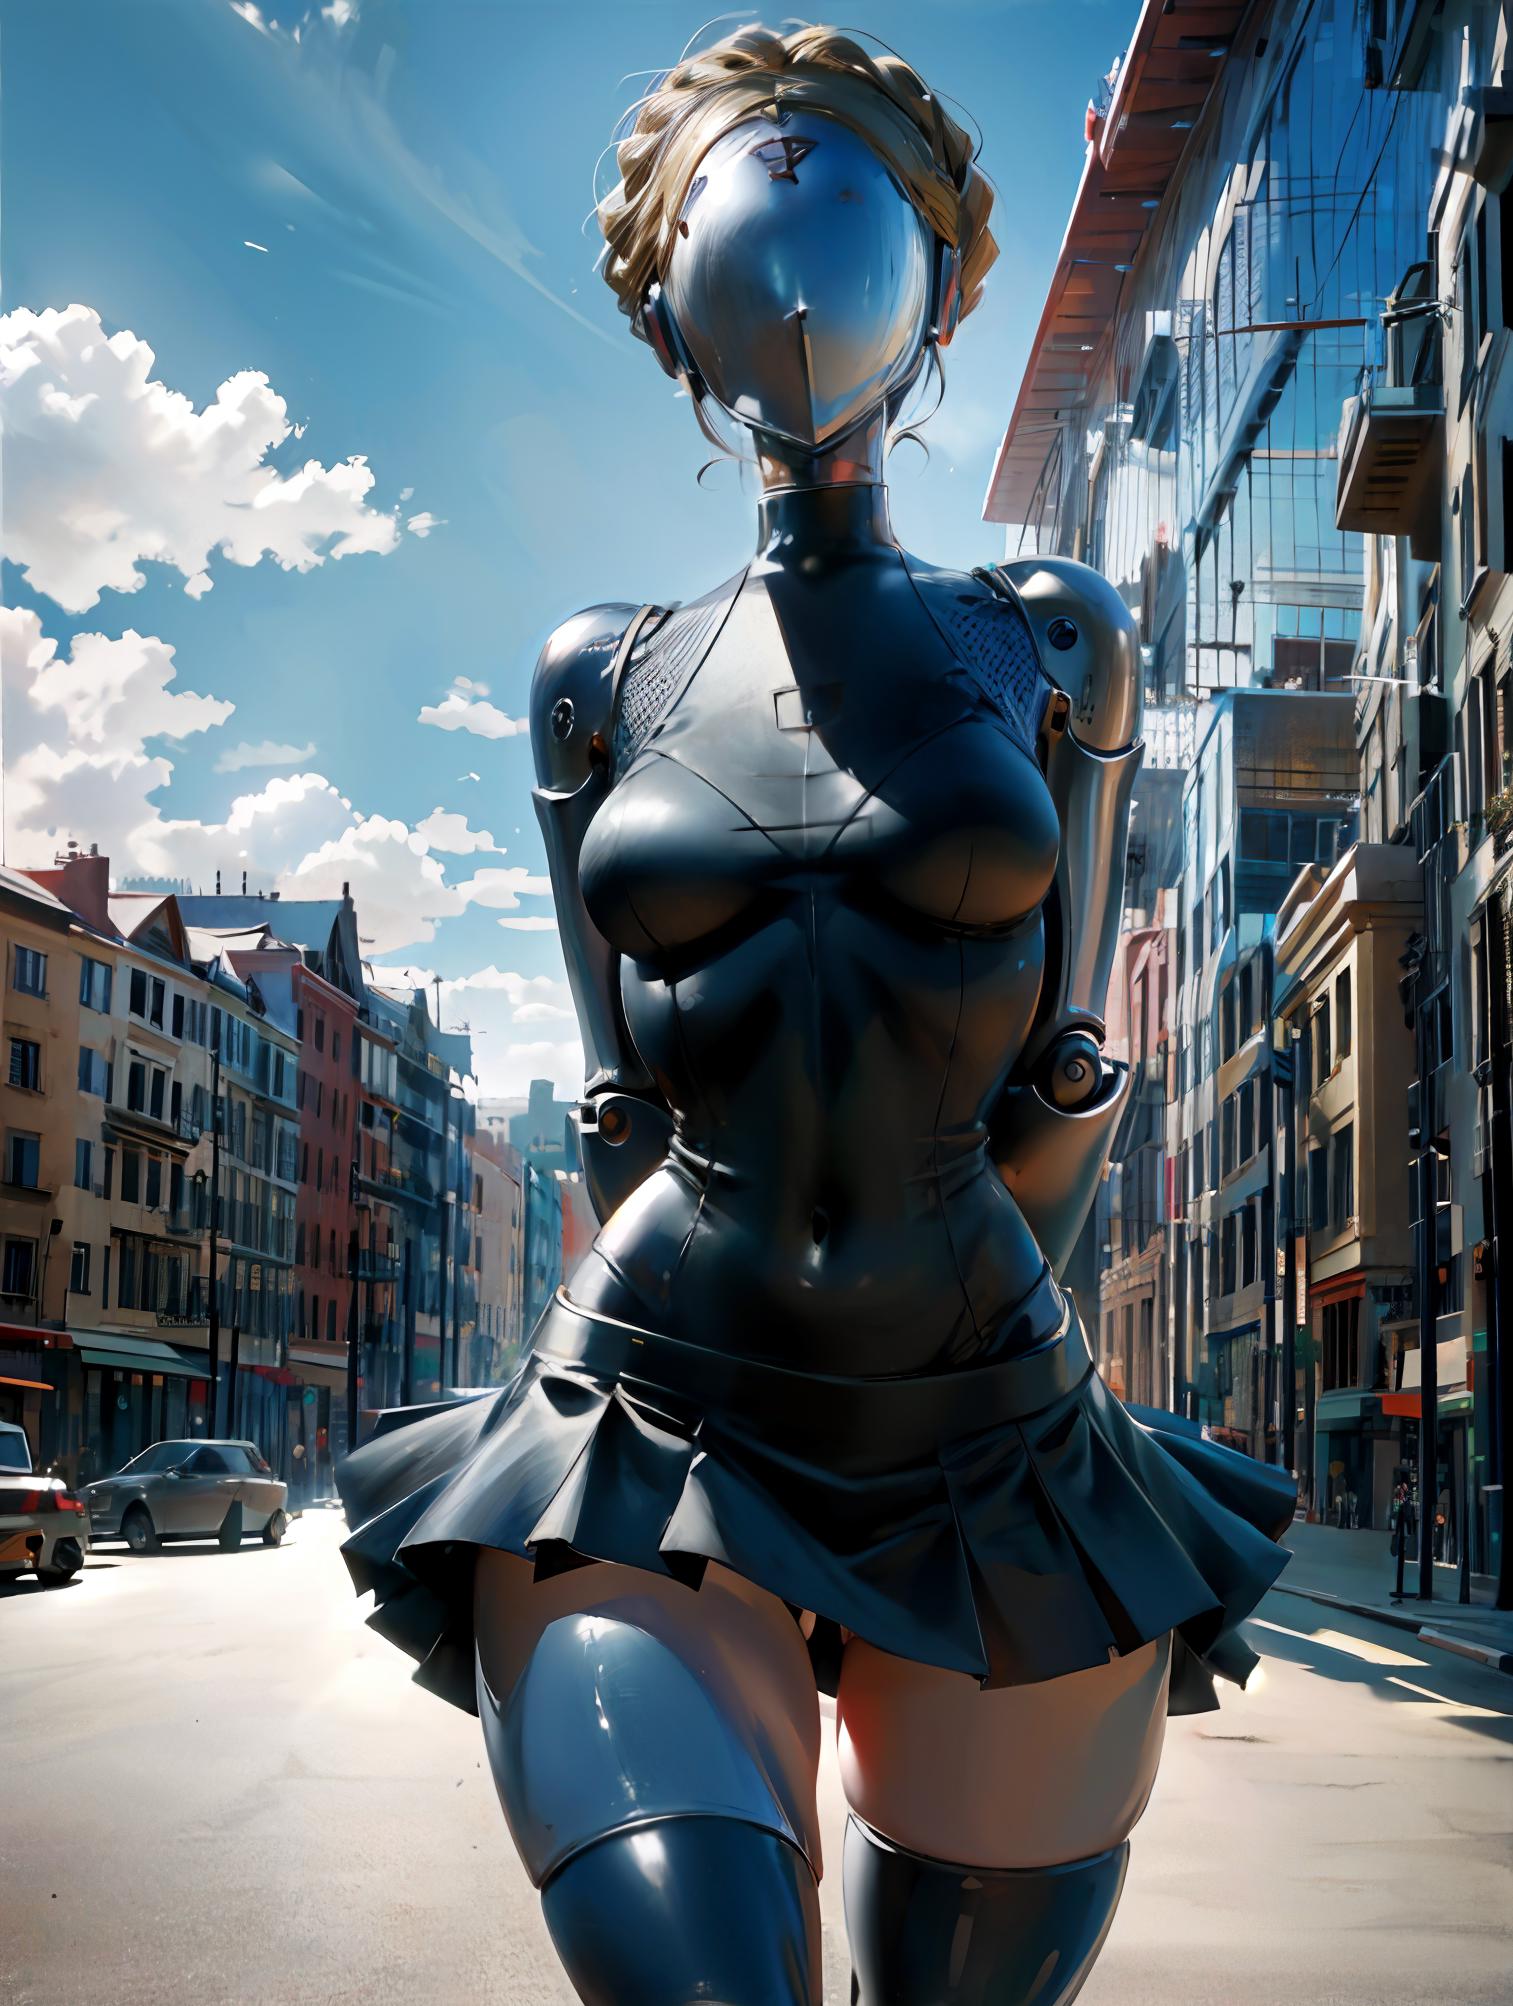 Atomic Heart robot maid image by nsaness